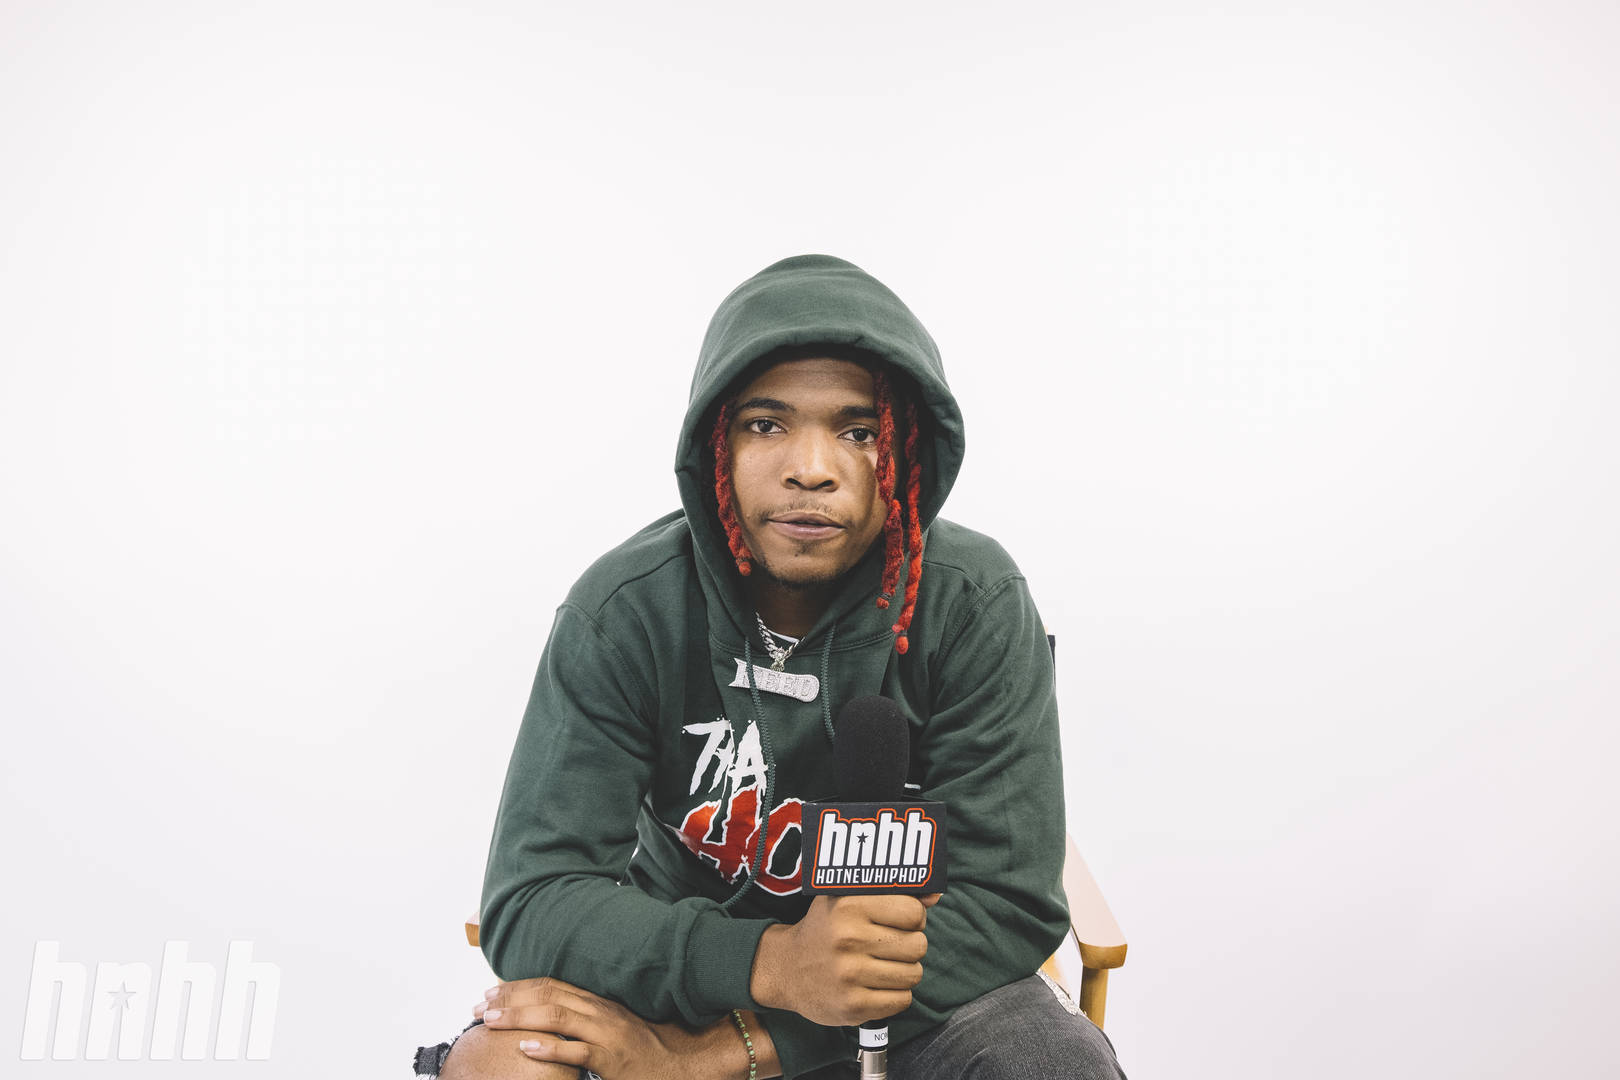 LIL KEED New interview